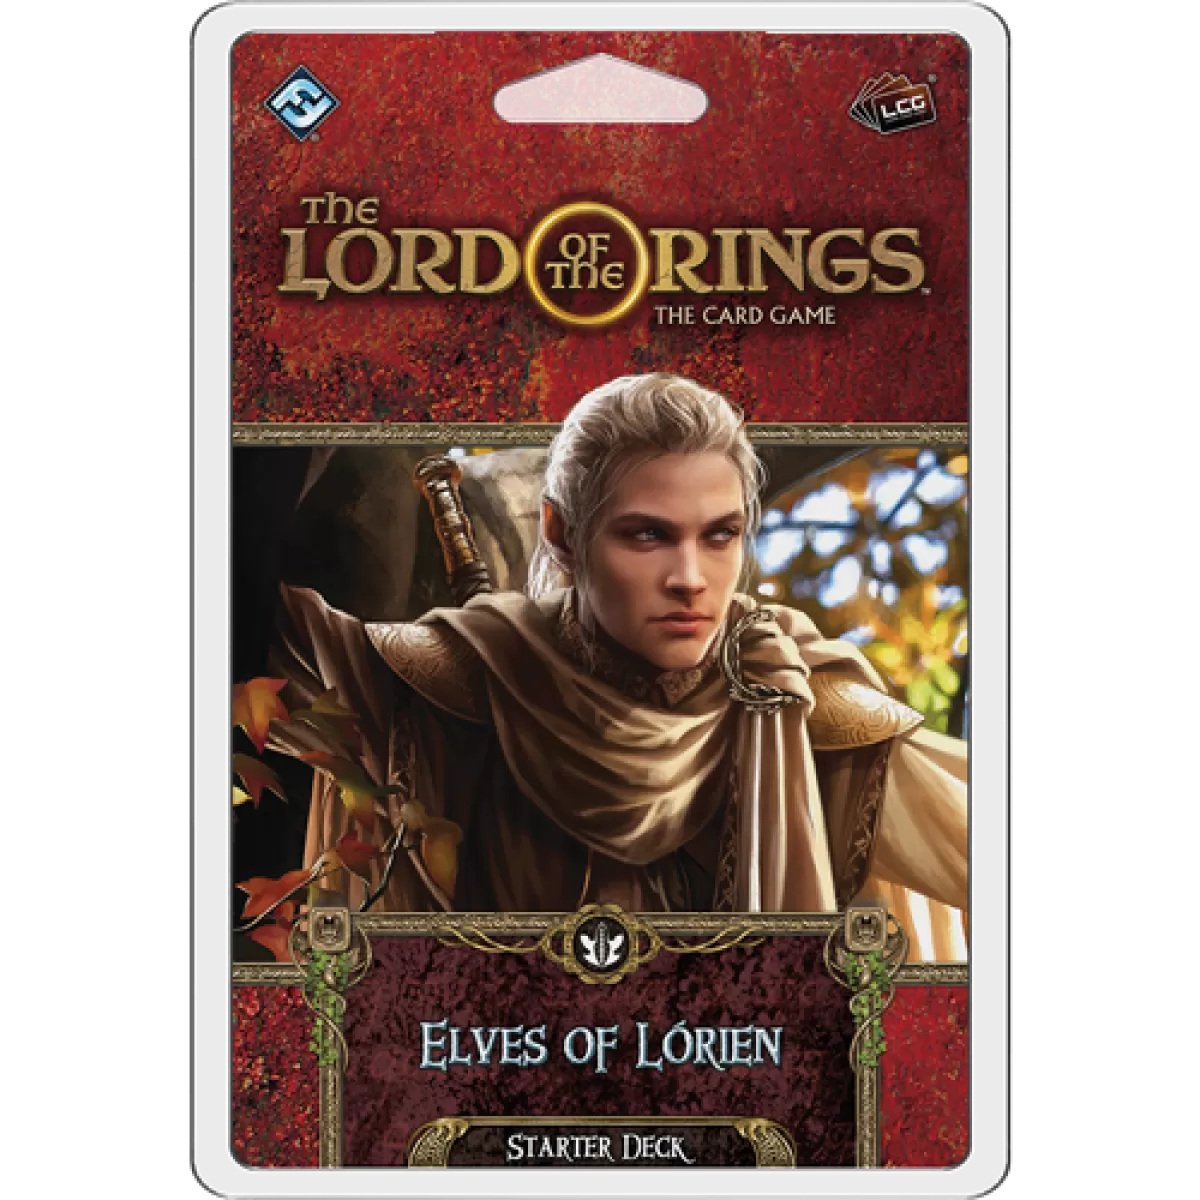 The Lord of the Rings LCG - Elves of Lórien Starter Deck